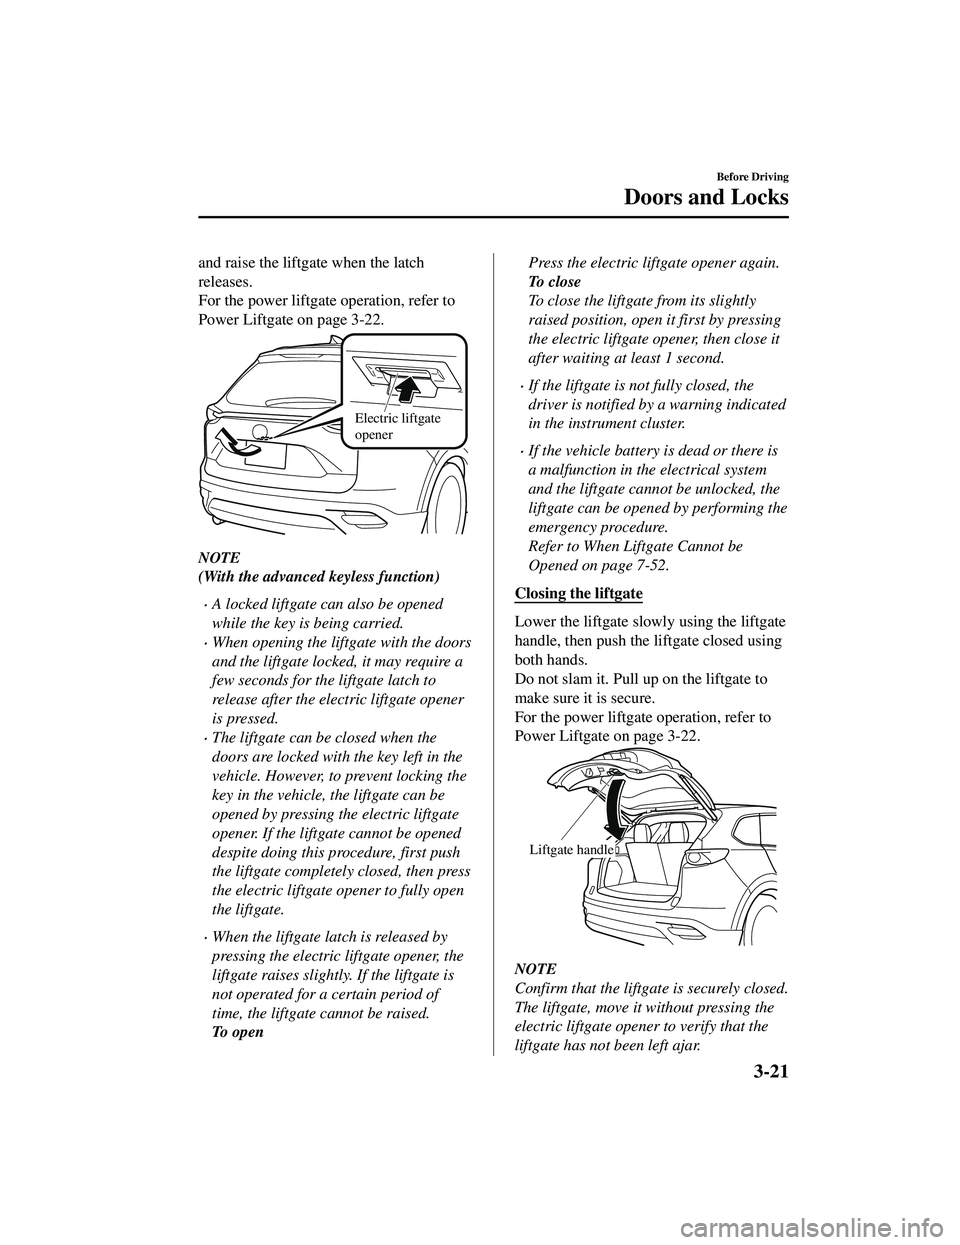 MAZDA MODEL CX-9 2021  Owners Manual and raise the liftgate when the latch
releases.
For the power liftgate operation, refer to
Power Liftgate on page 3-22.
Electric liftgate 
opener 
NOTE
(With the advanced keyless function)
A locked